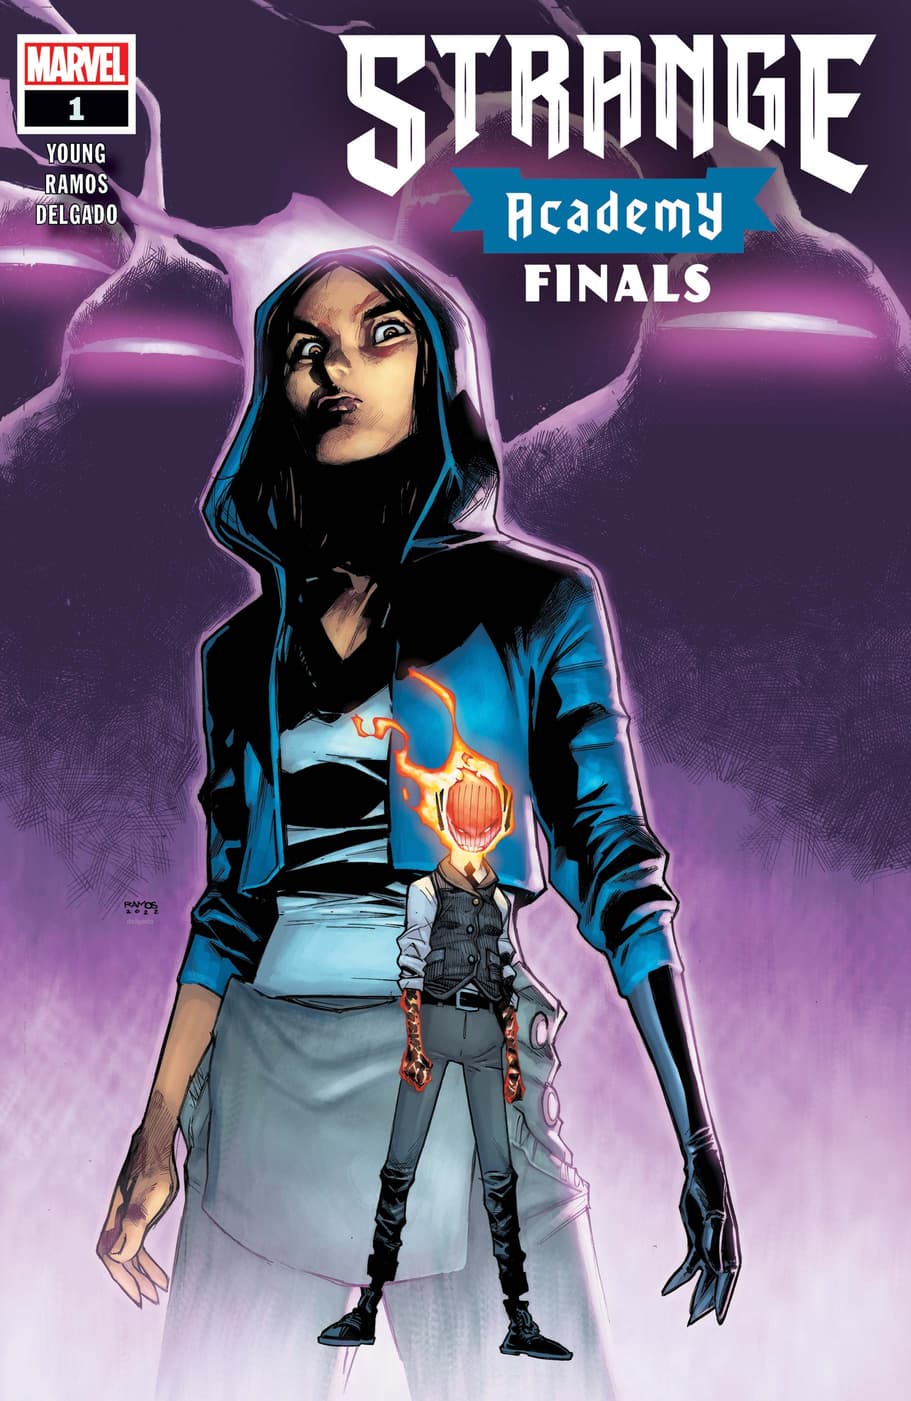 STRANGE ACADEMY: FINALS (2022) #1 cover by Humberto Ramos